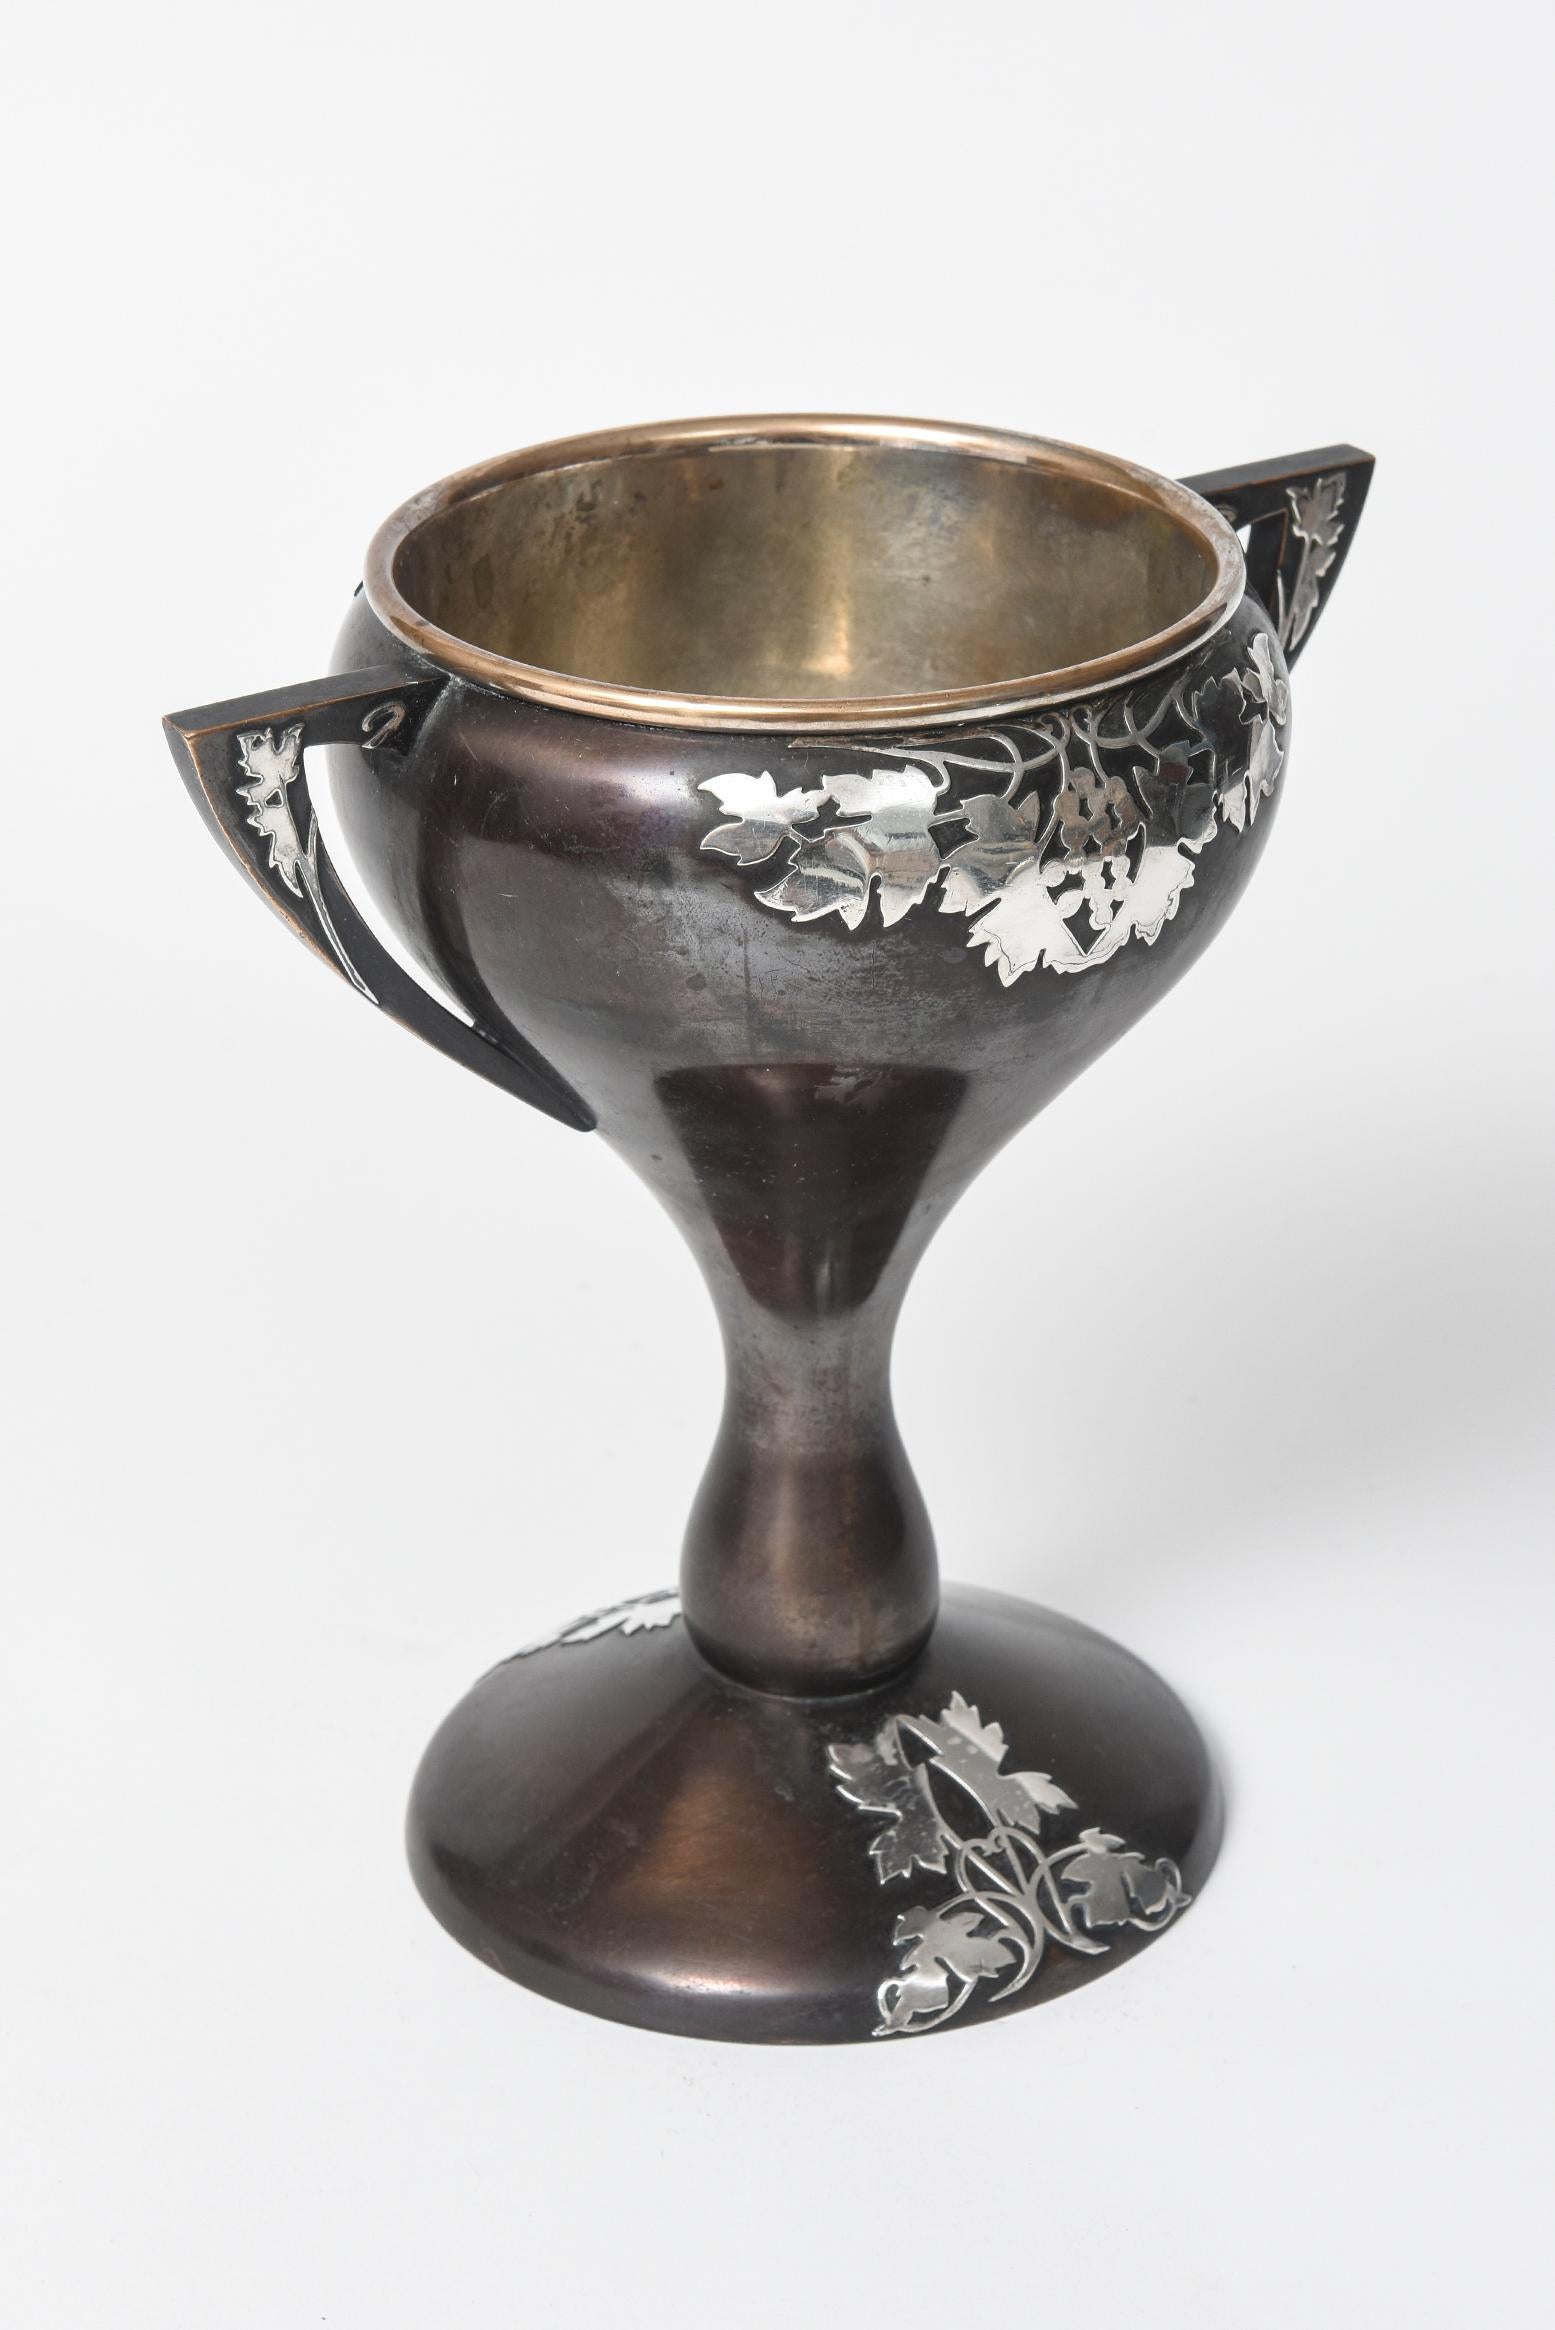 Early 20th century Arts & Crafts mixed metals trophy probably made by Heintz Art Metal Co. This beautiful bronze double handled loving cup has a gorgeous sterling silver overlay grape vine leaf design. The base, arms and peak of cup on the front as